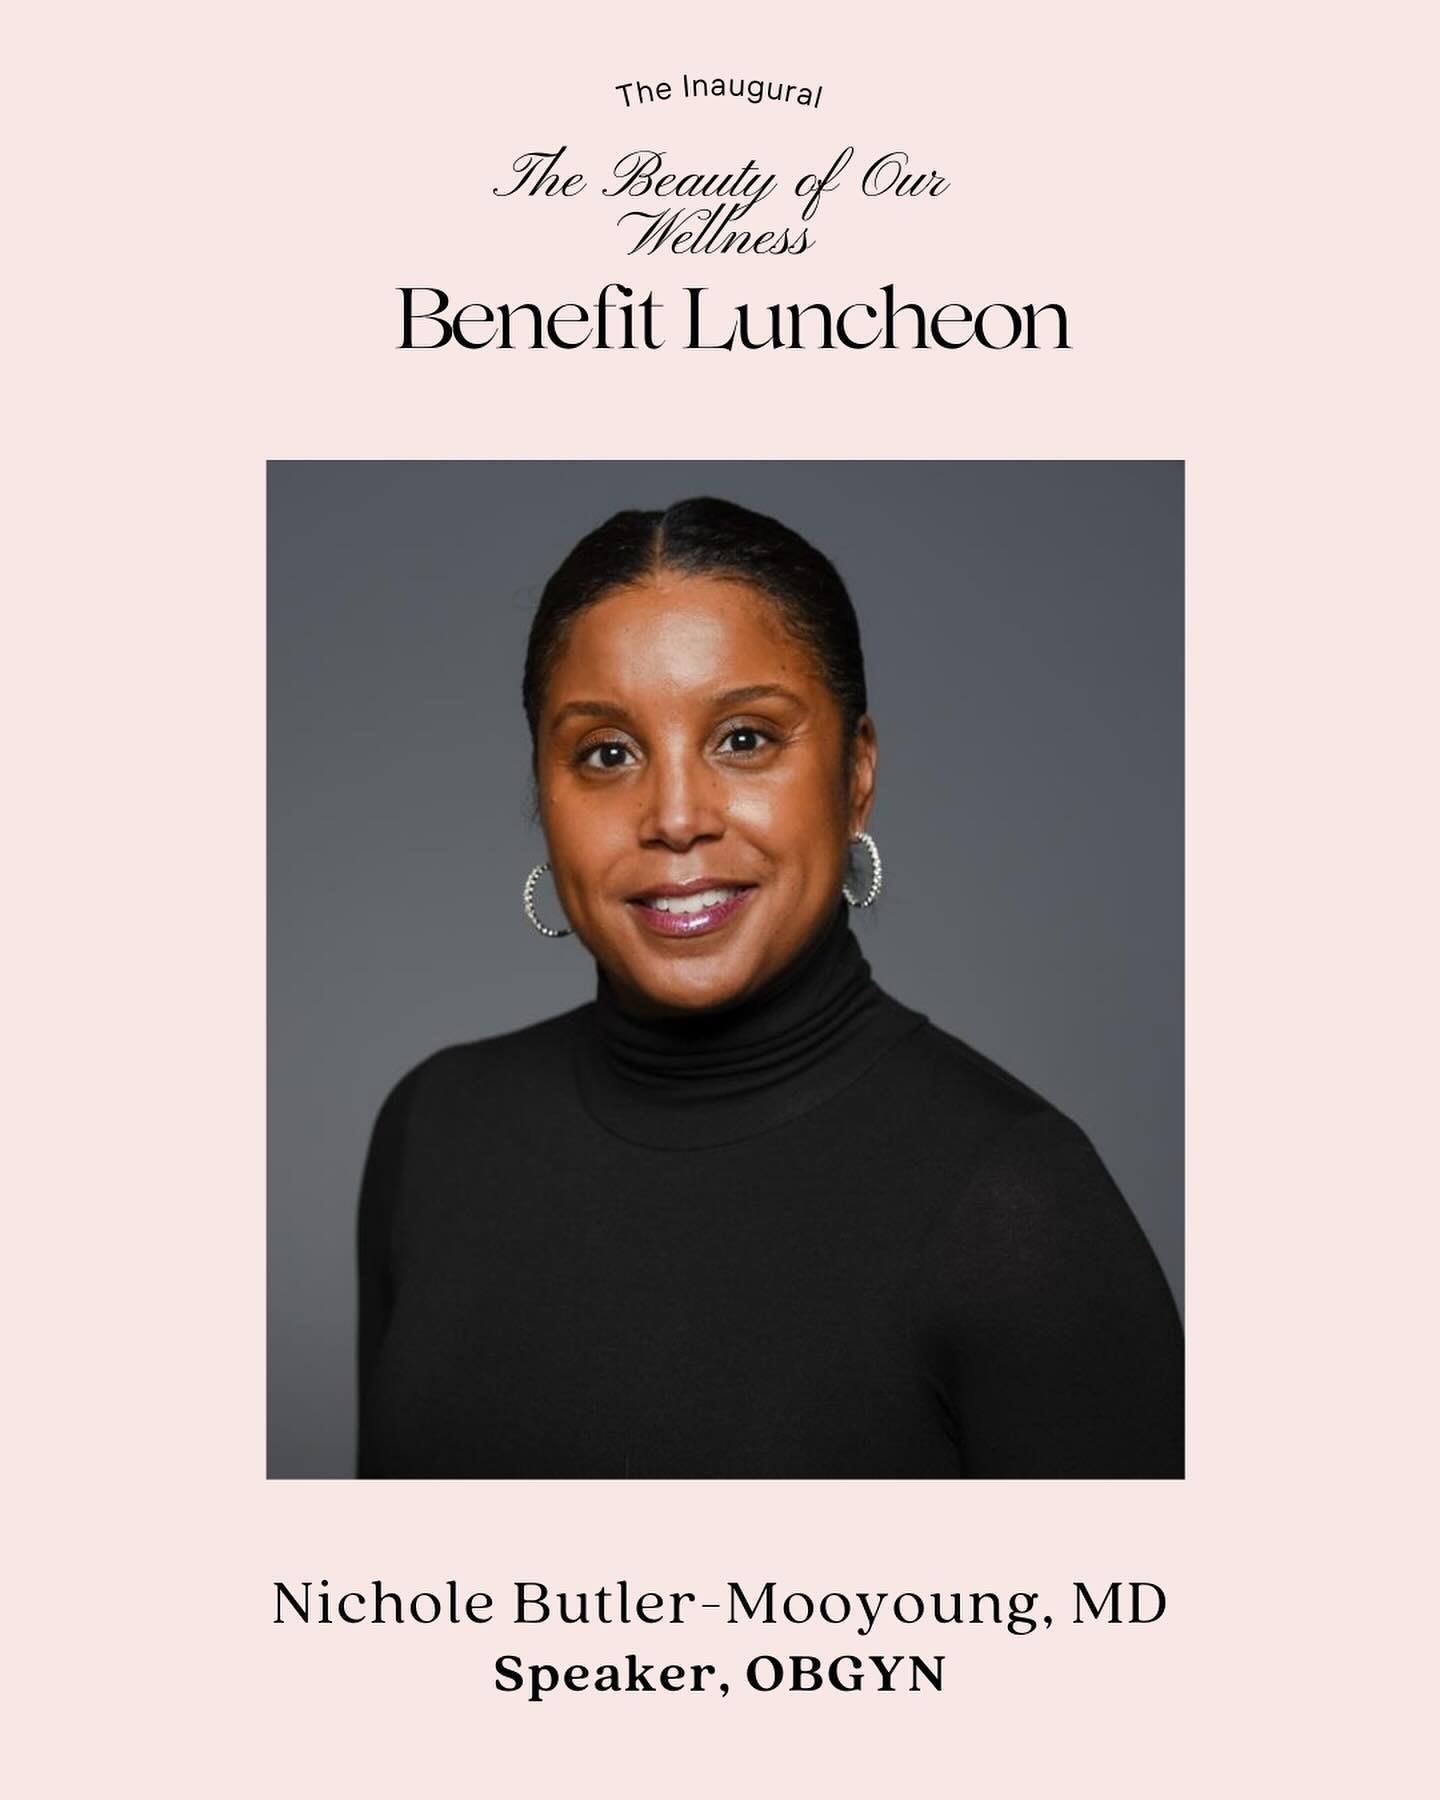 🌸 Meet The Speakers: We are so happy to introduce our first event speaker, Nichole Butler-Mooyoung, MD, who will be flying in from Chicago to speak to attendees! 

The aunt of two of our wonderful planning committee members Cori and Kendall Bond, Dr